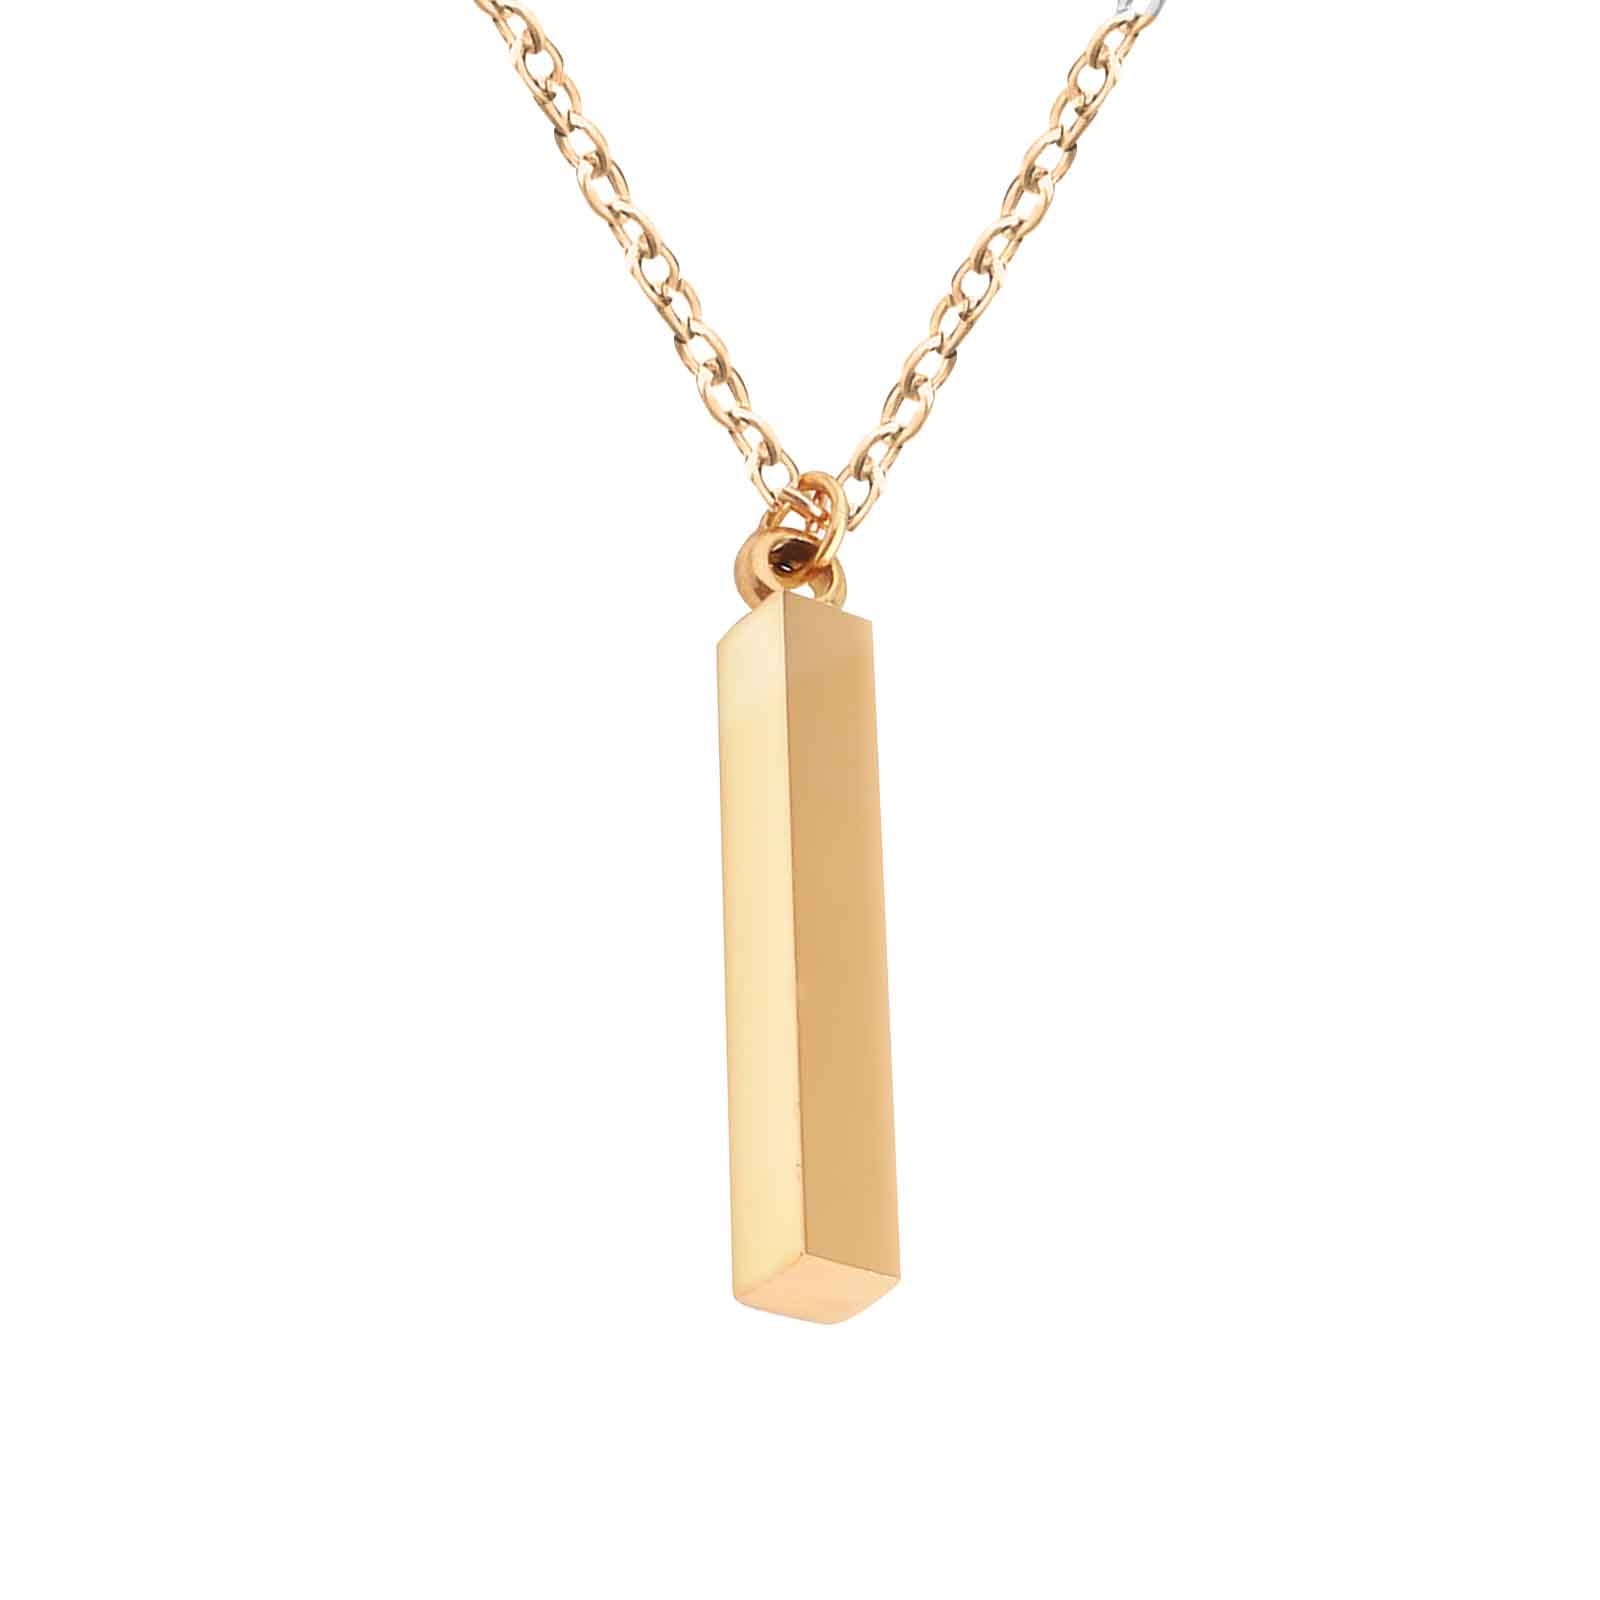 Buy Diamond Stone Personalized Vertical Pillar 3D Bar Name Necklace Silver  or Gold Oak and Luna Jewelry for Her Mom Wife Mother's Day Gift Online in  India - Etsy